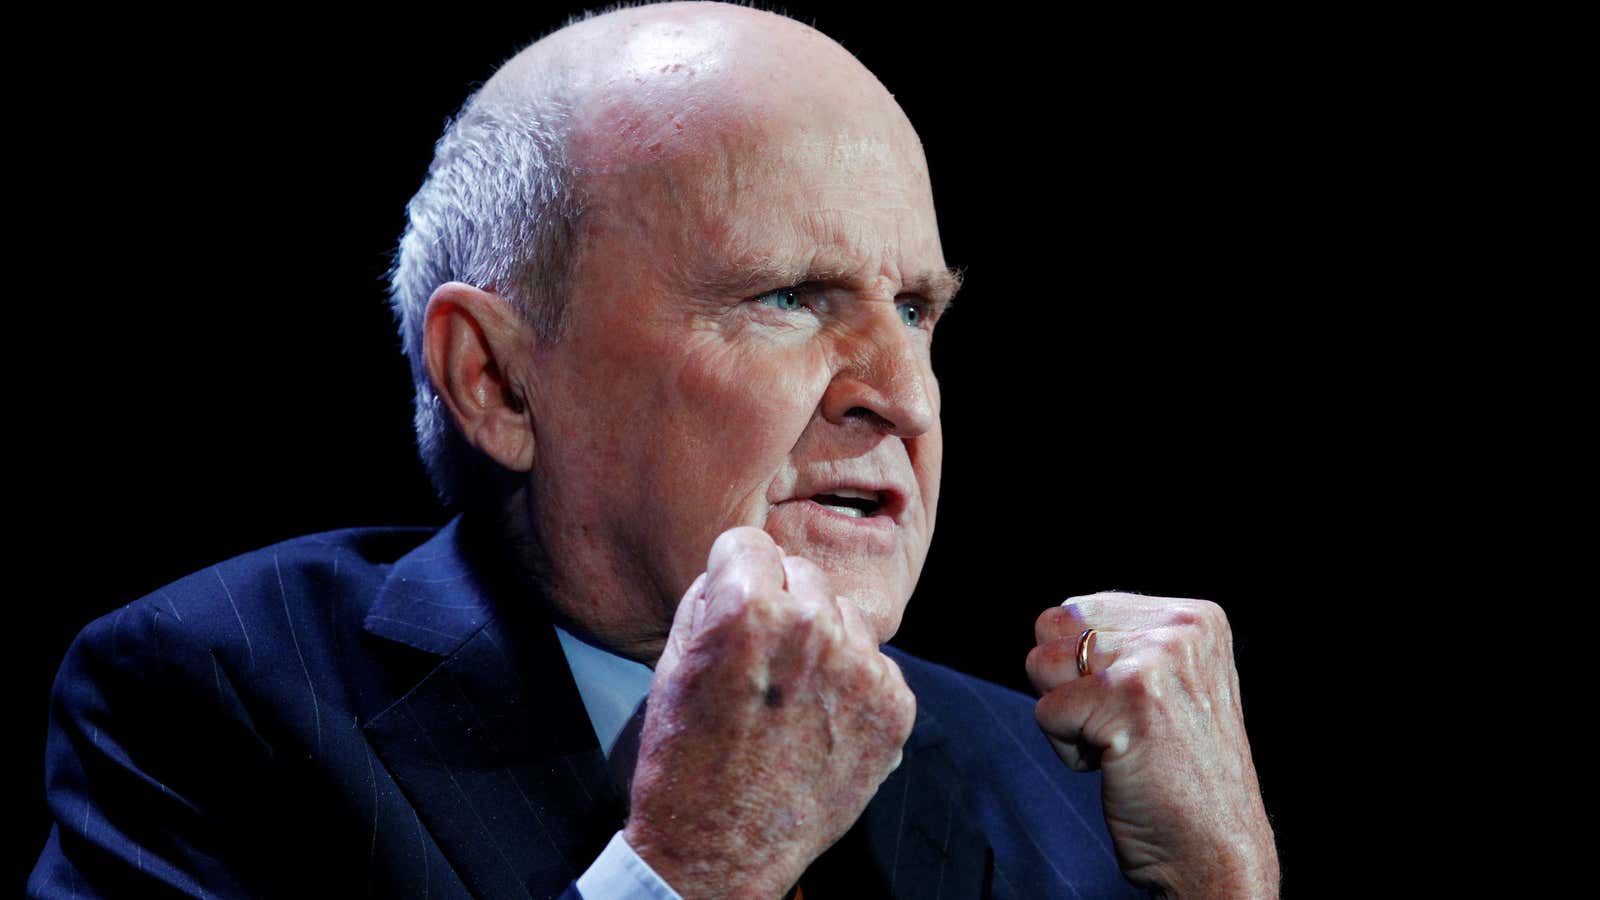 FILE PHOTO: Former CEO of General Electric, Jack Welch, speaks during the World Business Forum in New York October 5, 2010.  REUTERS/Lucas Jackson/File Photo – RC2QBF9U5ZG8